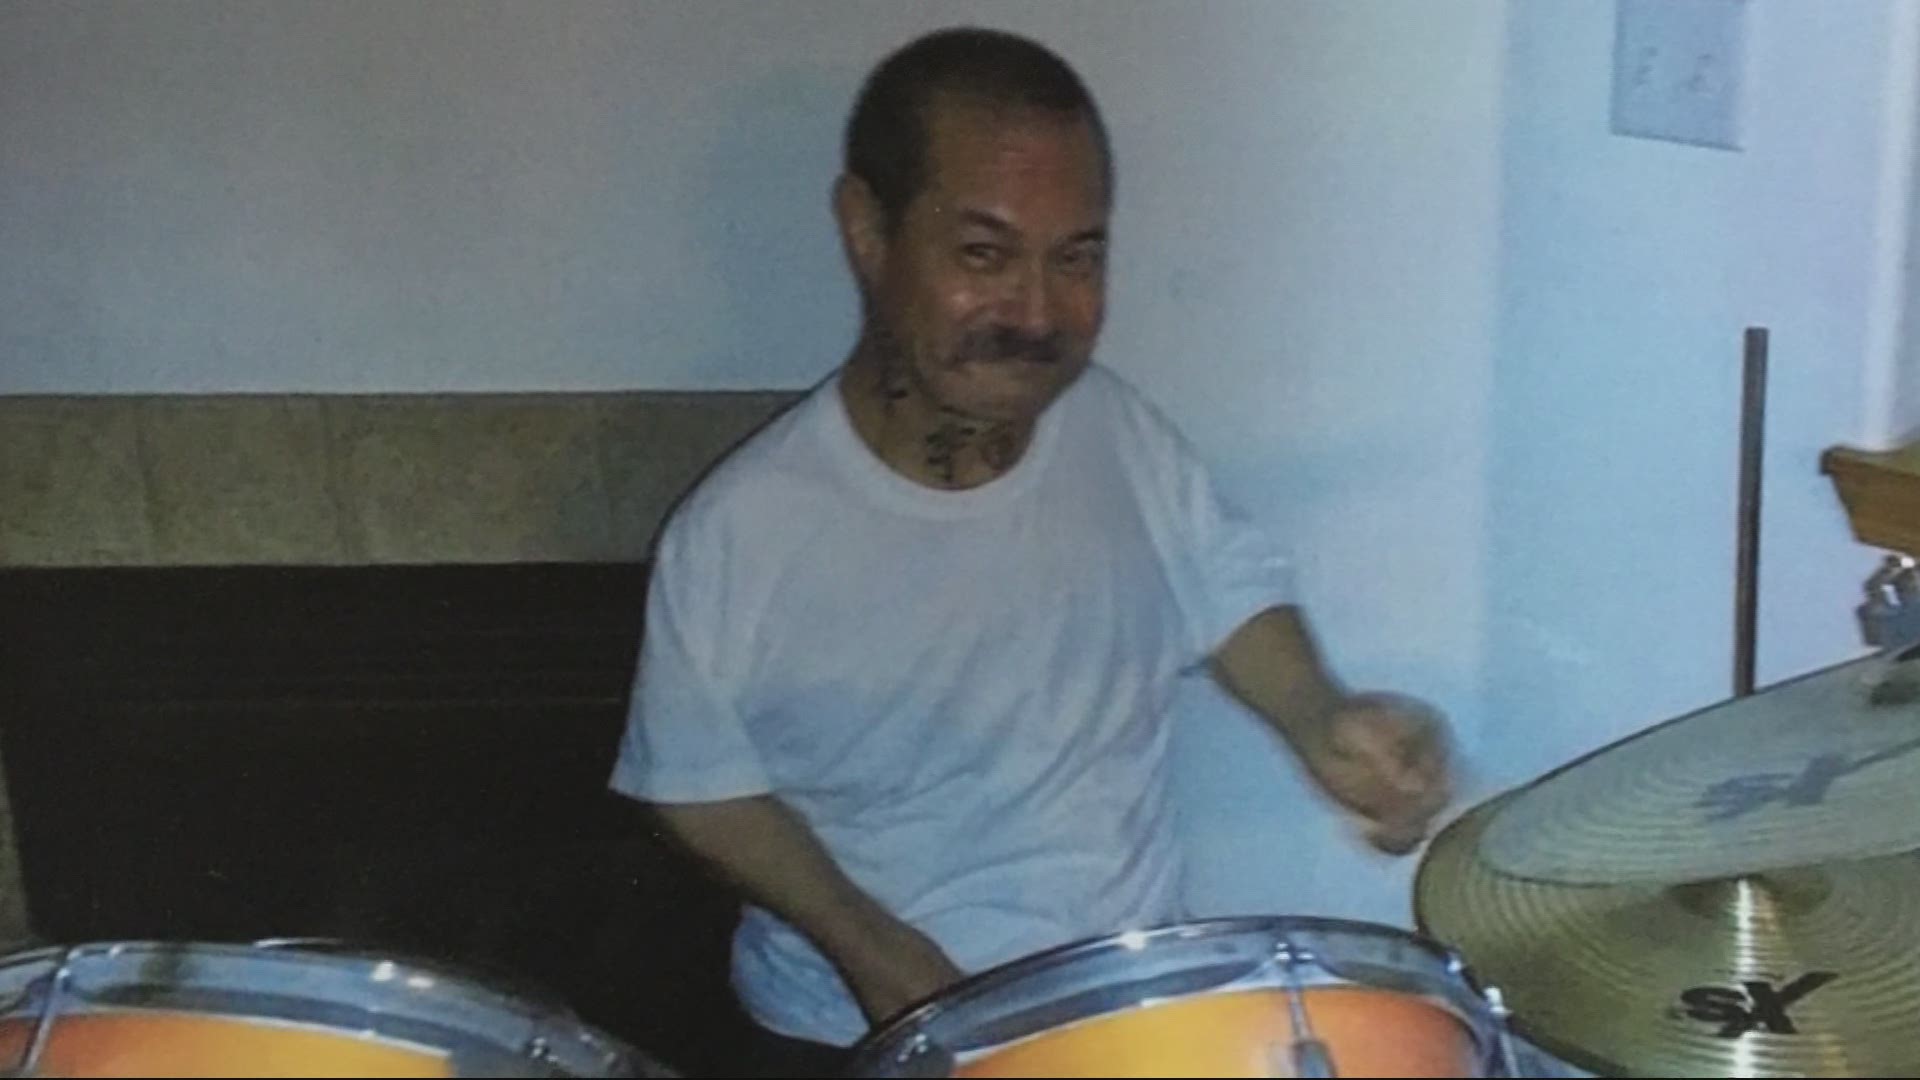 Robert Song, 60, of Gresham disappeared on July 5. As Katherine Cook reports, Song's family is asking for the public's help to find him.